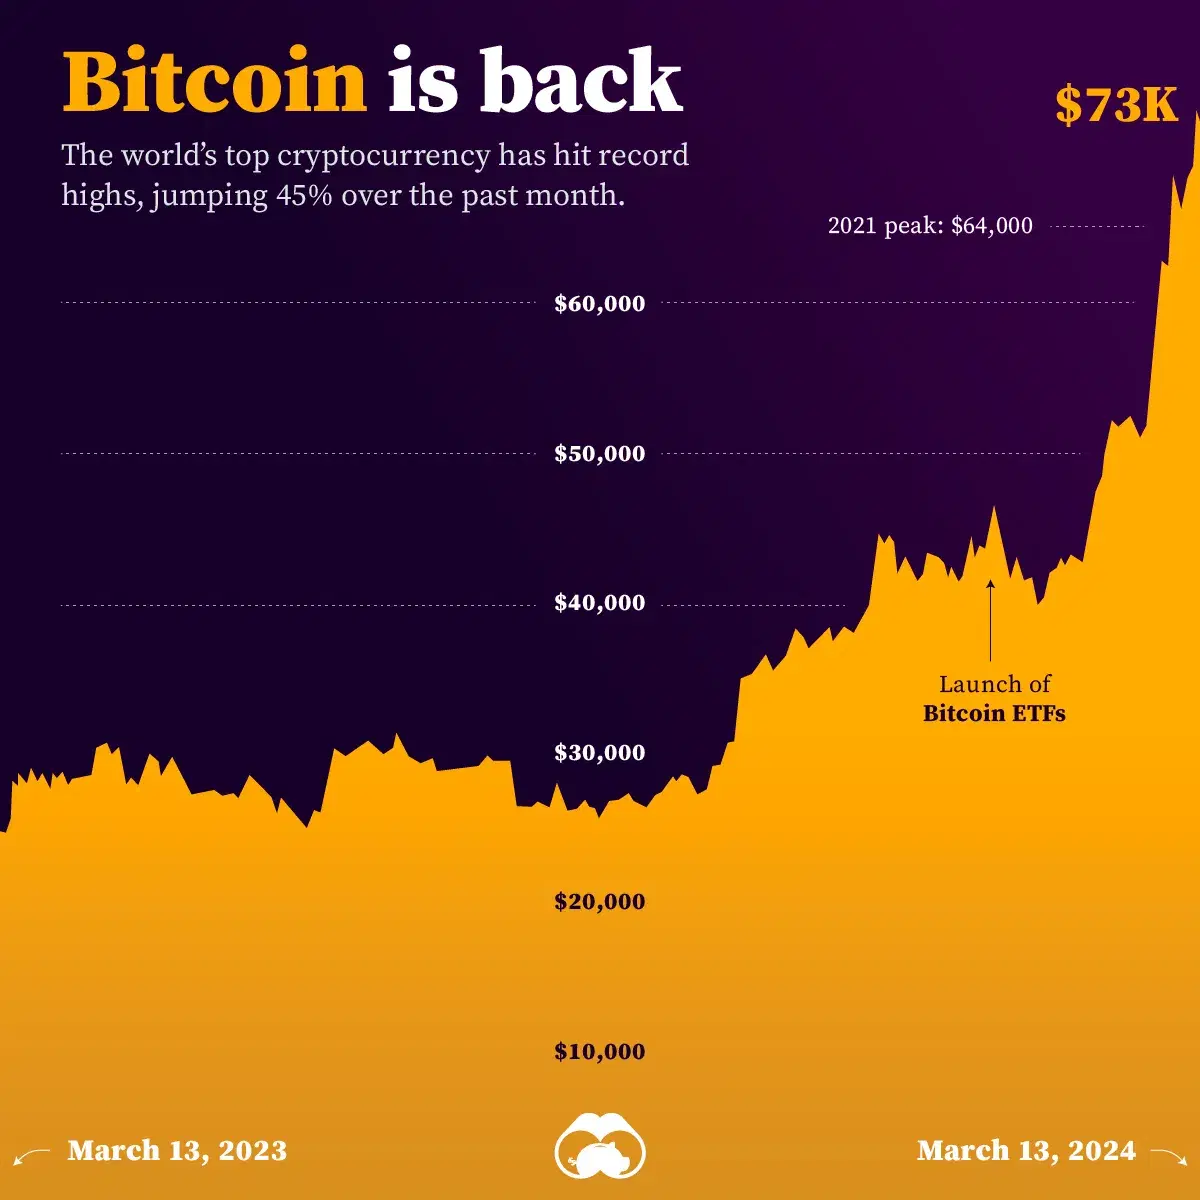 The Bitcoin Price Has Hit a Record High After Fresh Wave of Enthusiasm